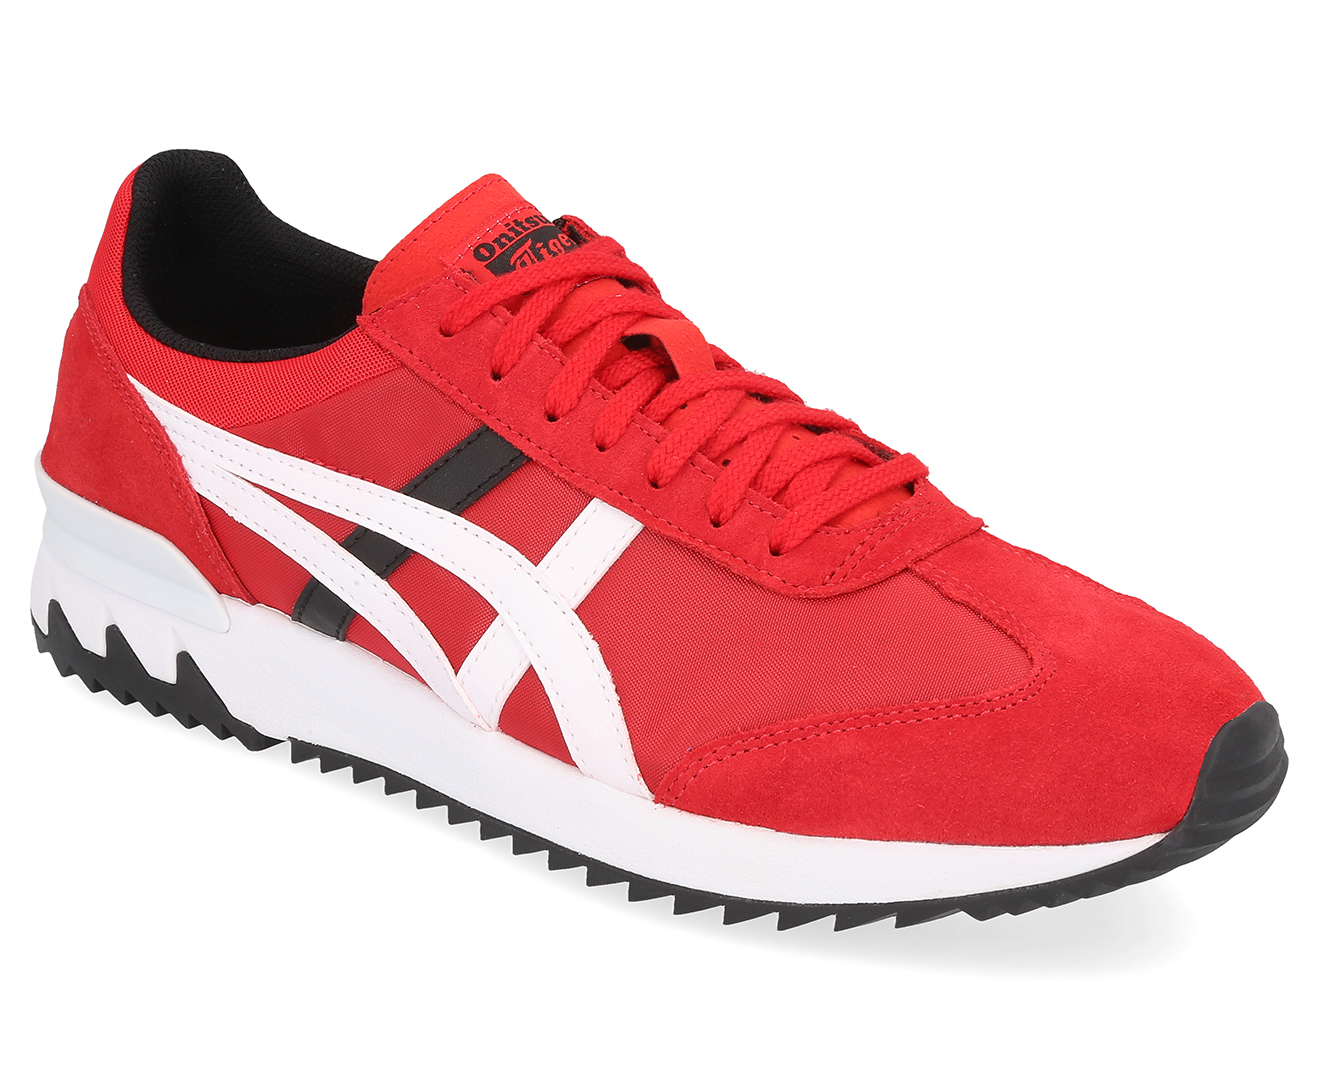 Onitsuka Tiger California 78 Ex Shoe - Red/White | Catch.co.nz